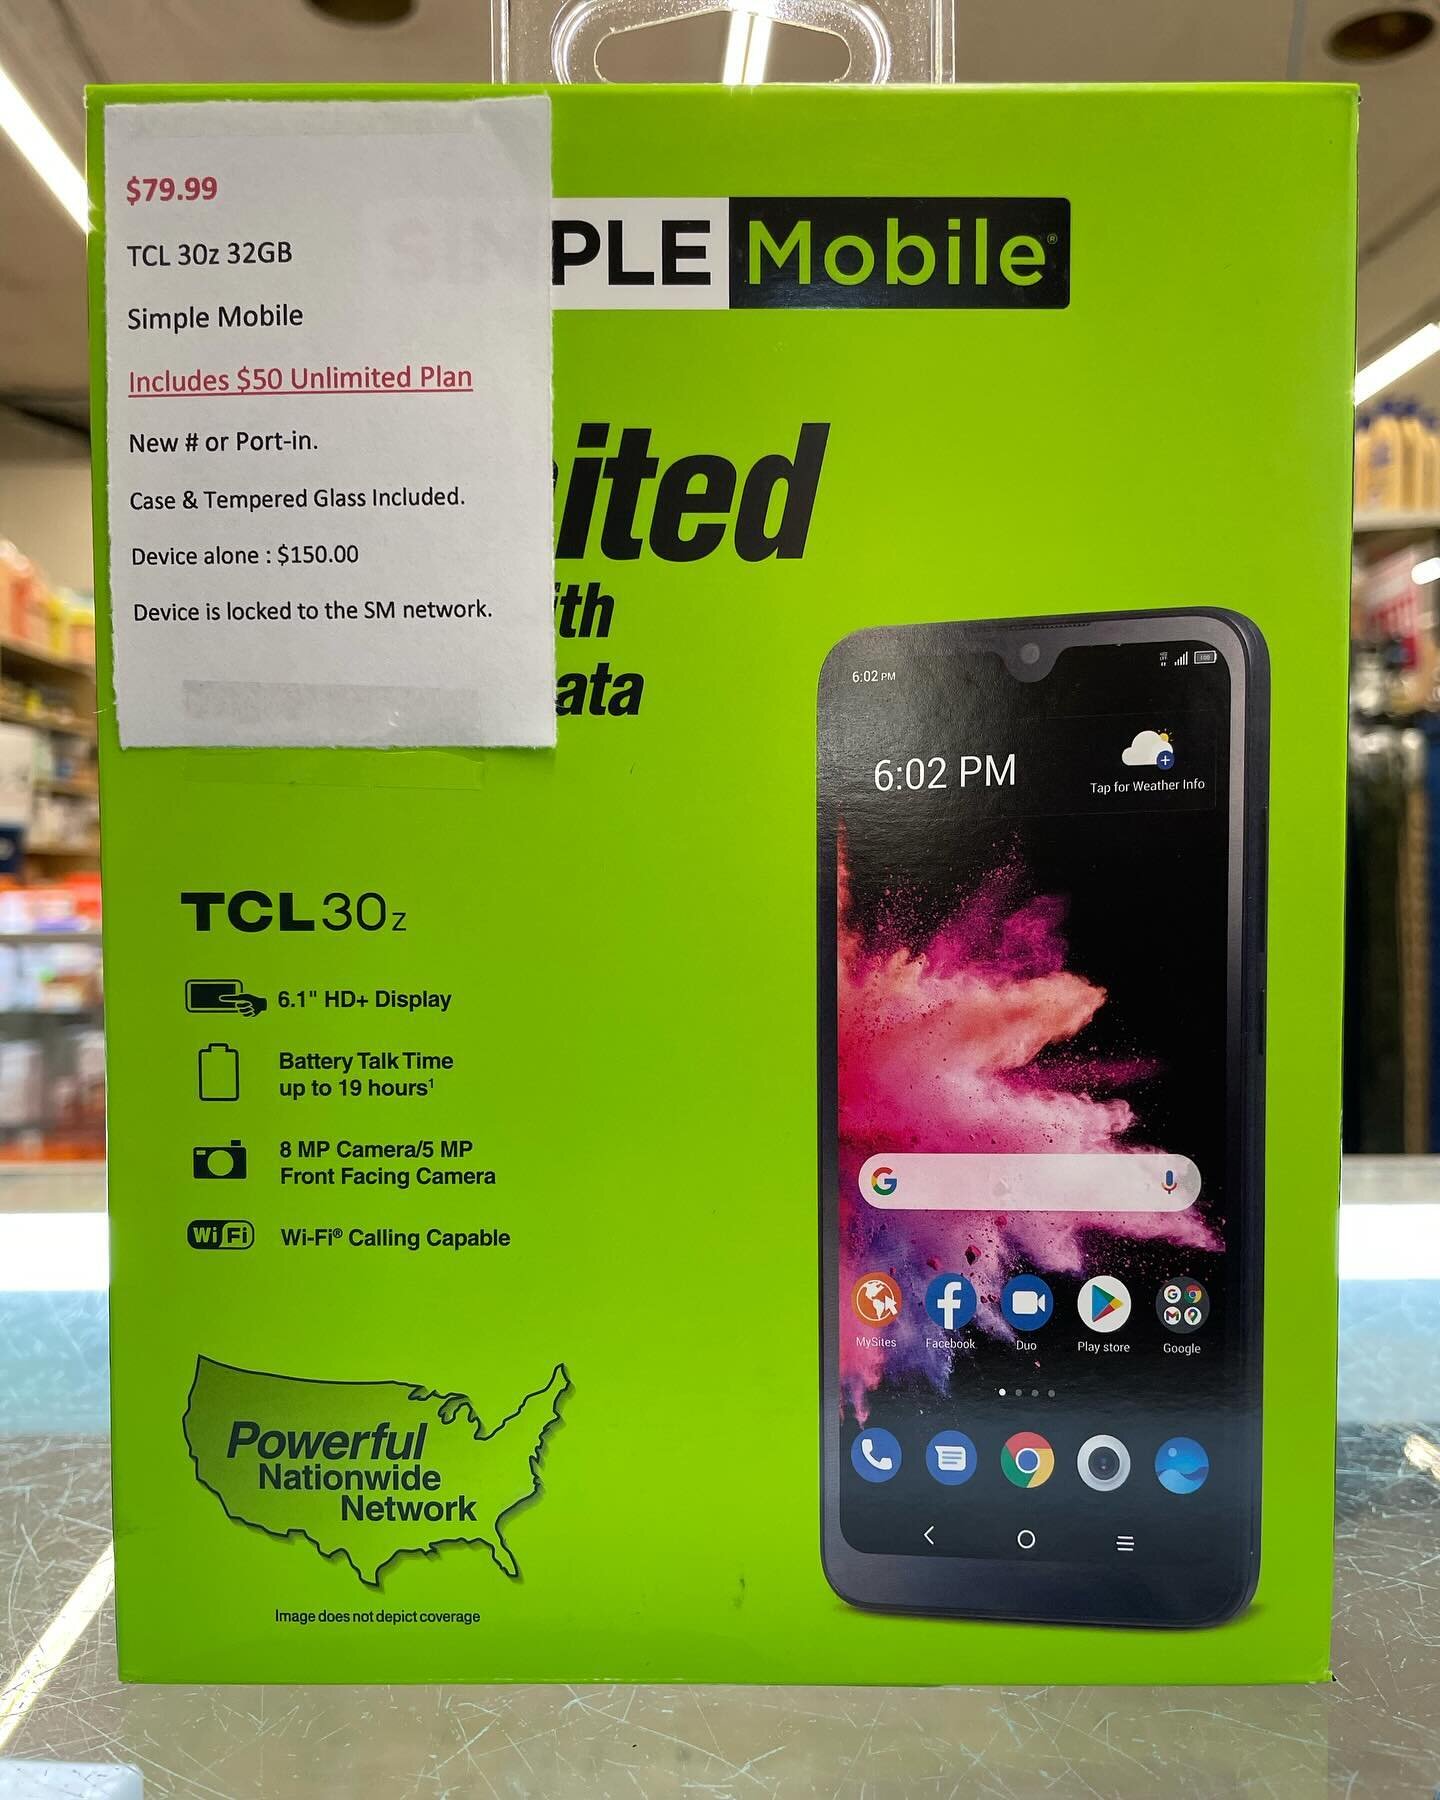 Simple Mobile branded phones available.

Prices noted include the $50 Unlimited plan.

All pictured are new and locked to Simple Mobile.

Free case and tempered glass included.

No activation fee.

Pioneer Mobile
71 Mt. Vernon Place
Newark NJ 07106
W